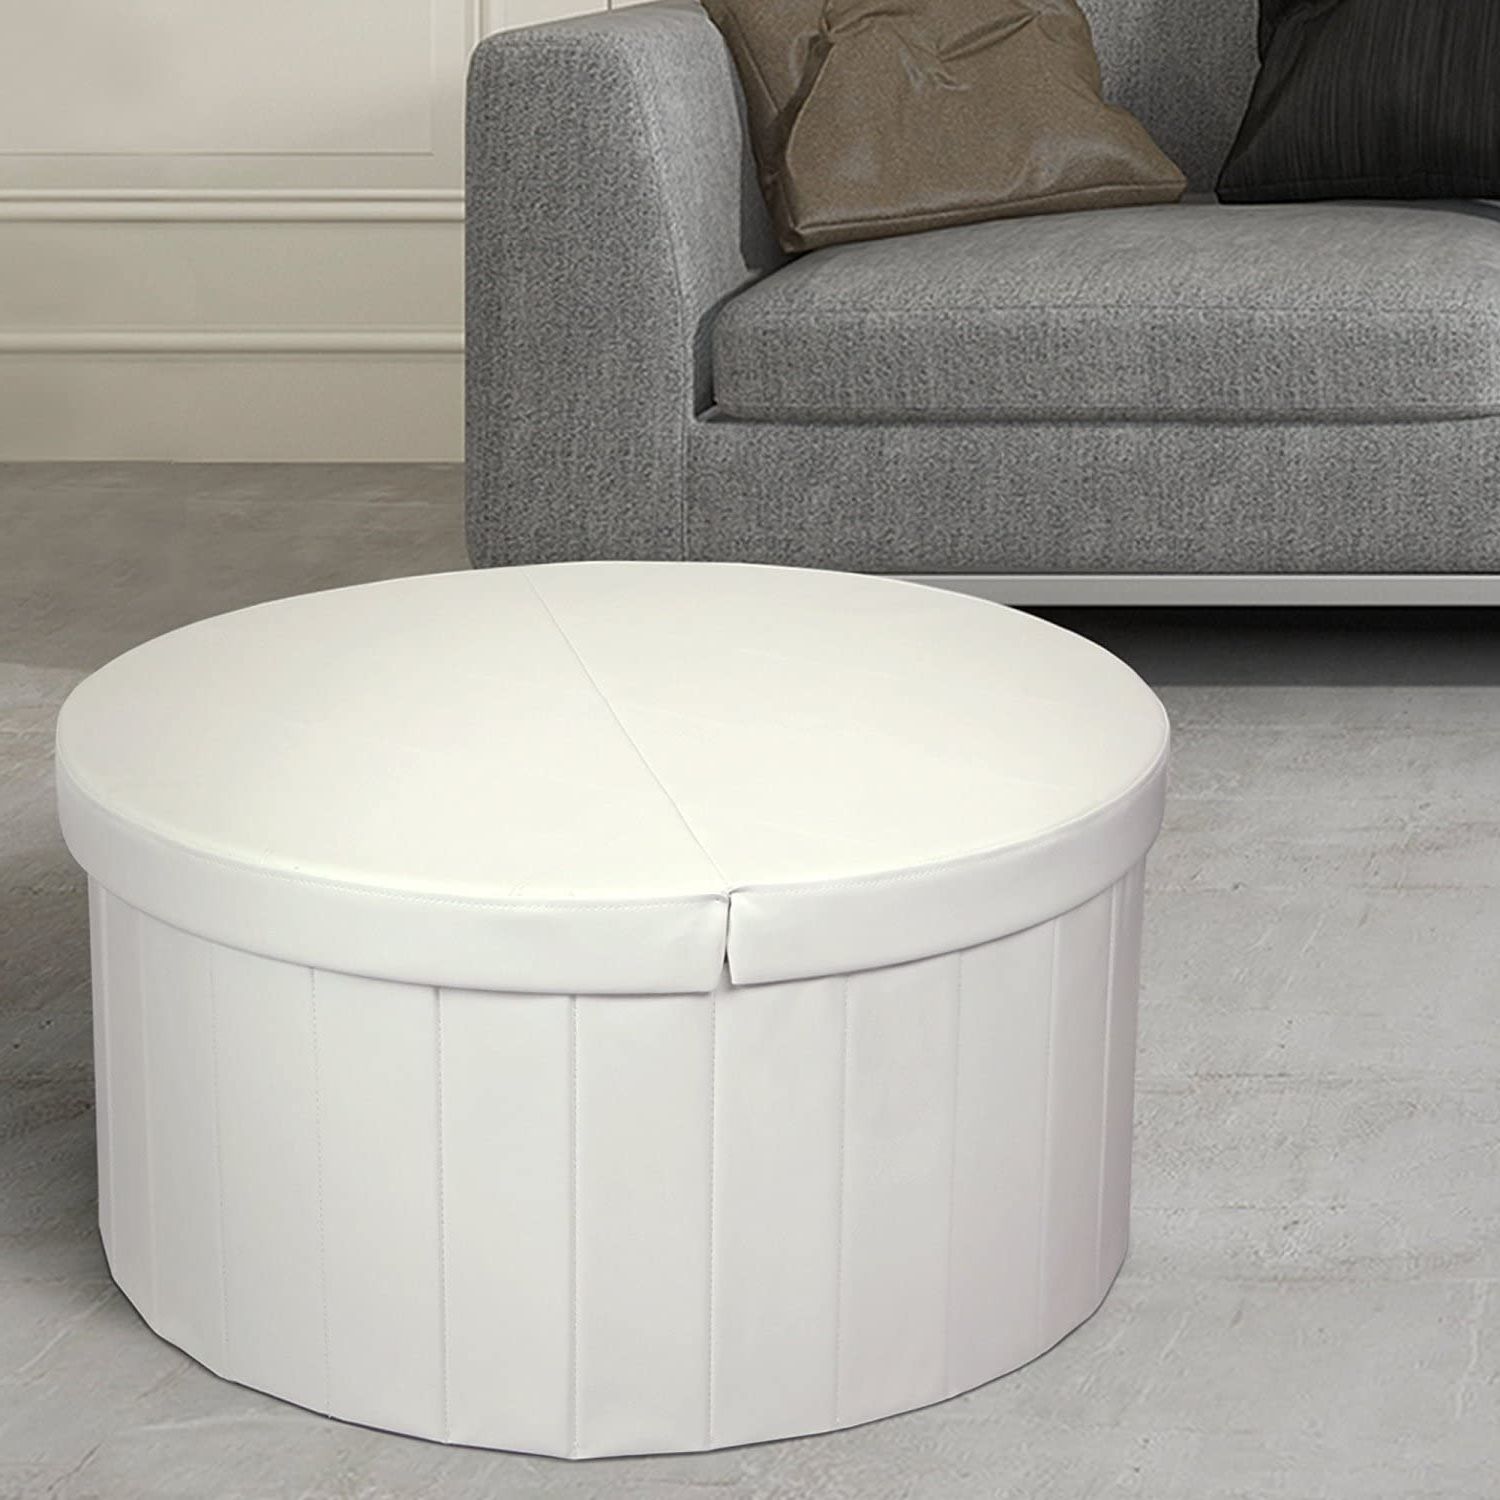 Best Round White Leather Ottoman Tufted – Your House Regarding Well Known Gray And Cream Geometric Cuboid Pouf Ottomans (View 9 of 10)